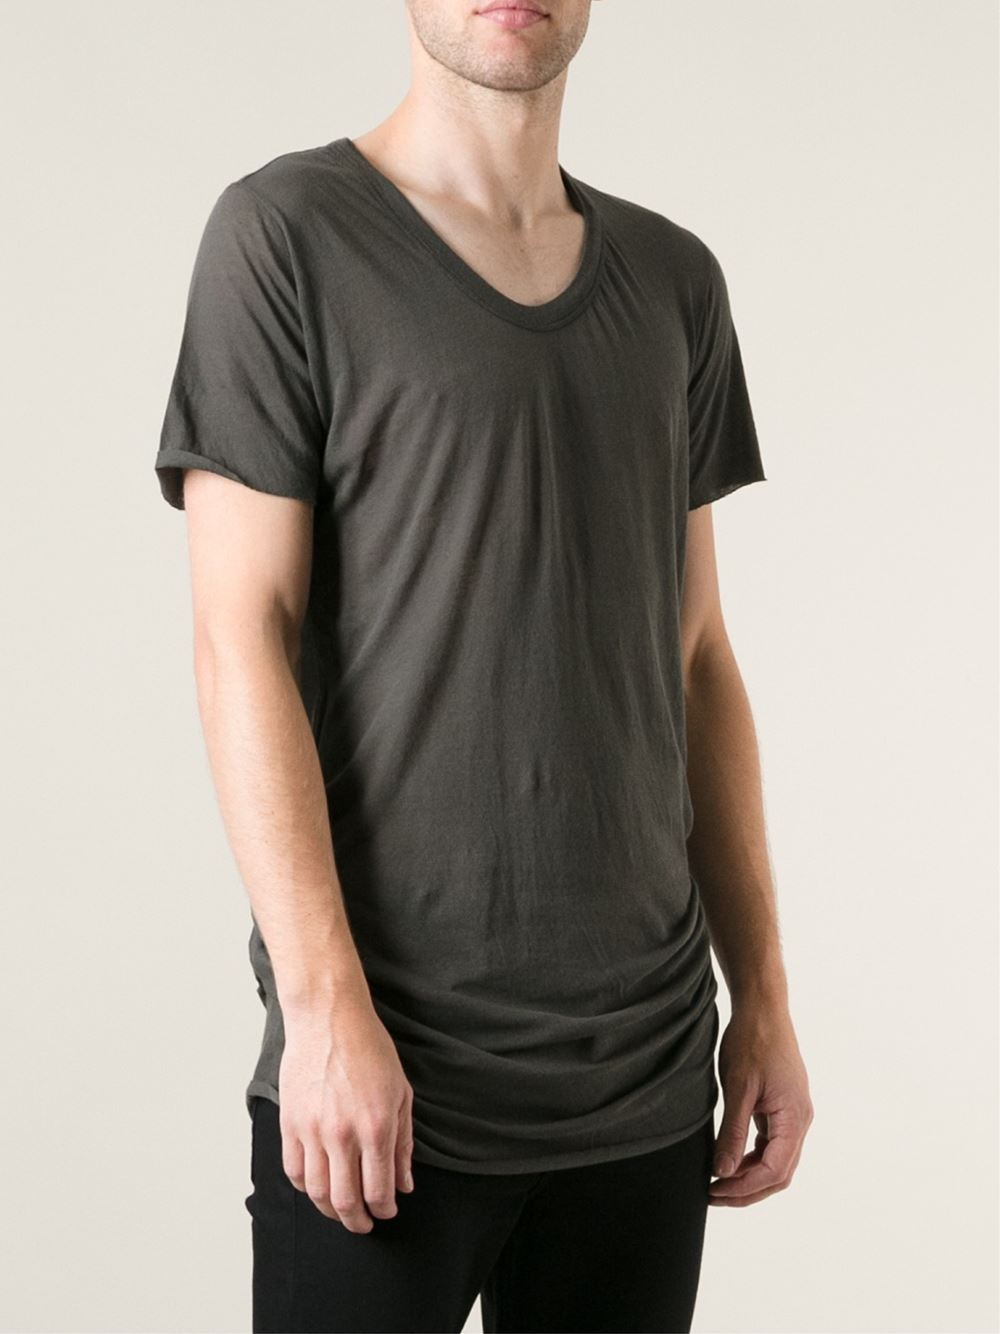 Lyst - Rick Owens Long T-shirt in Gray for Men